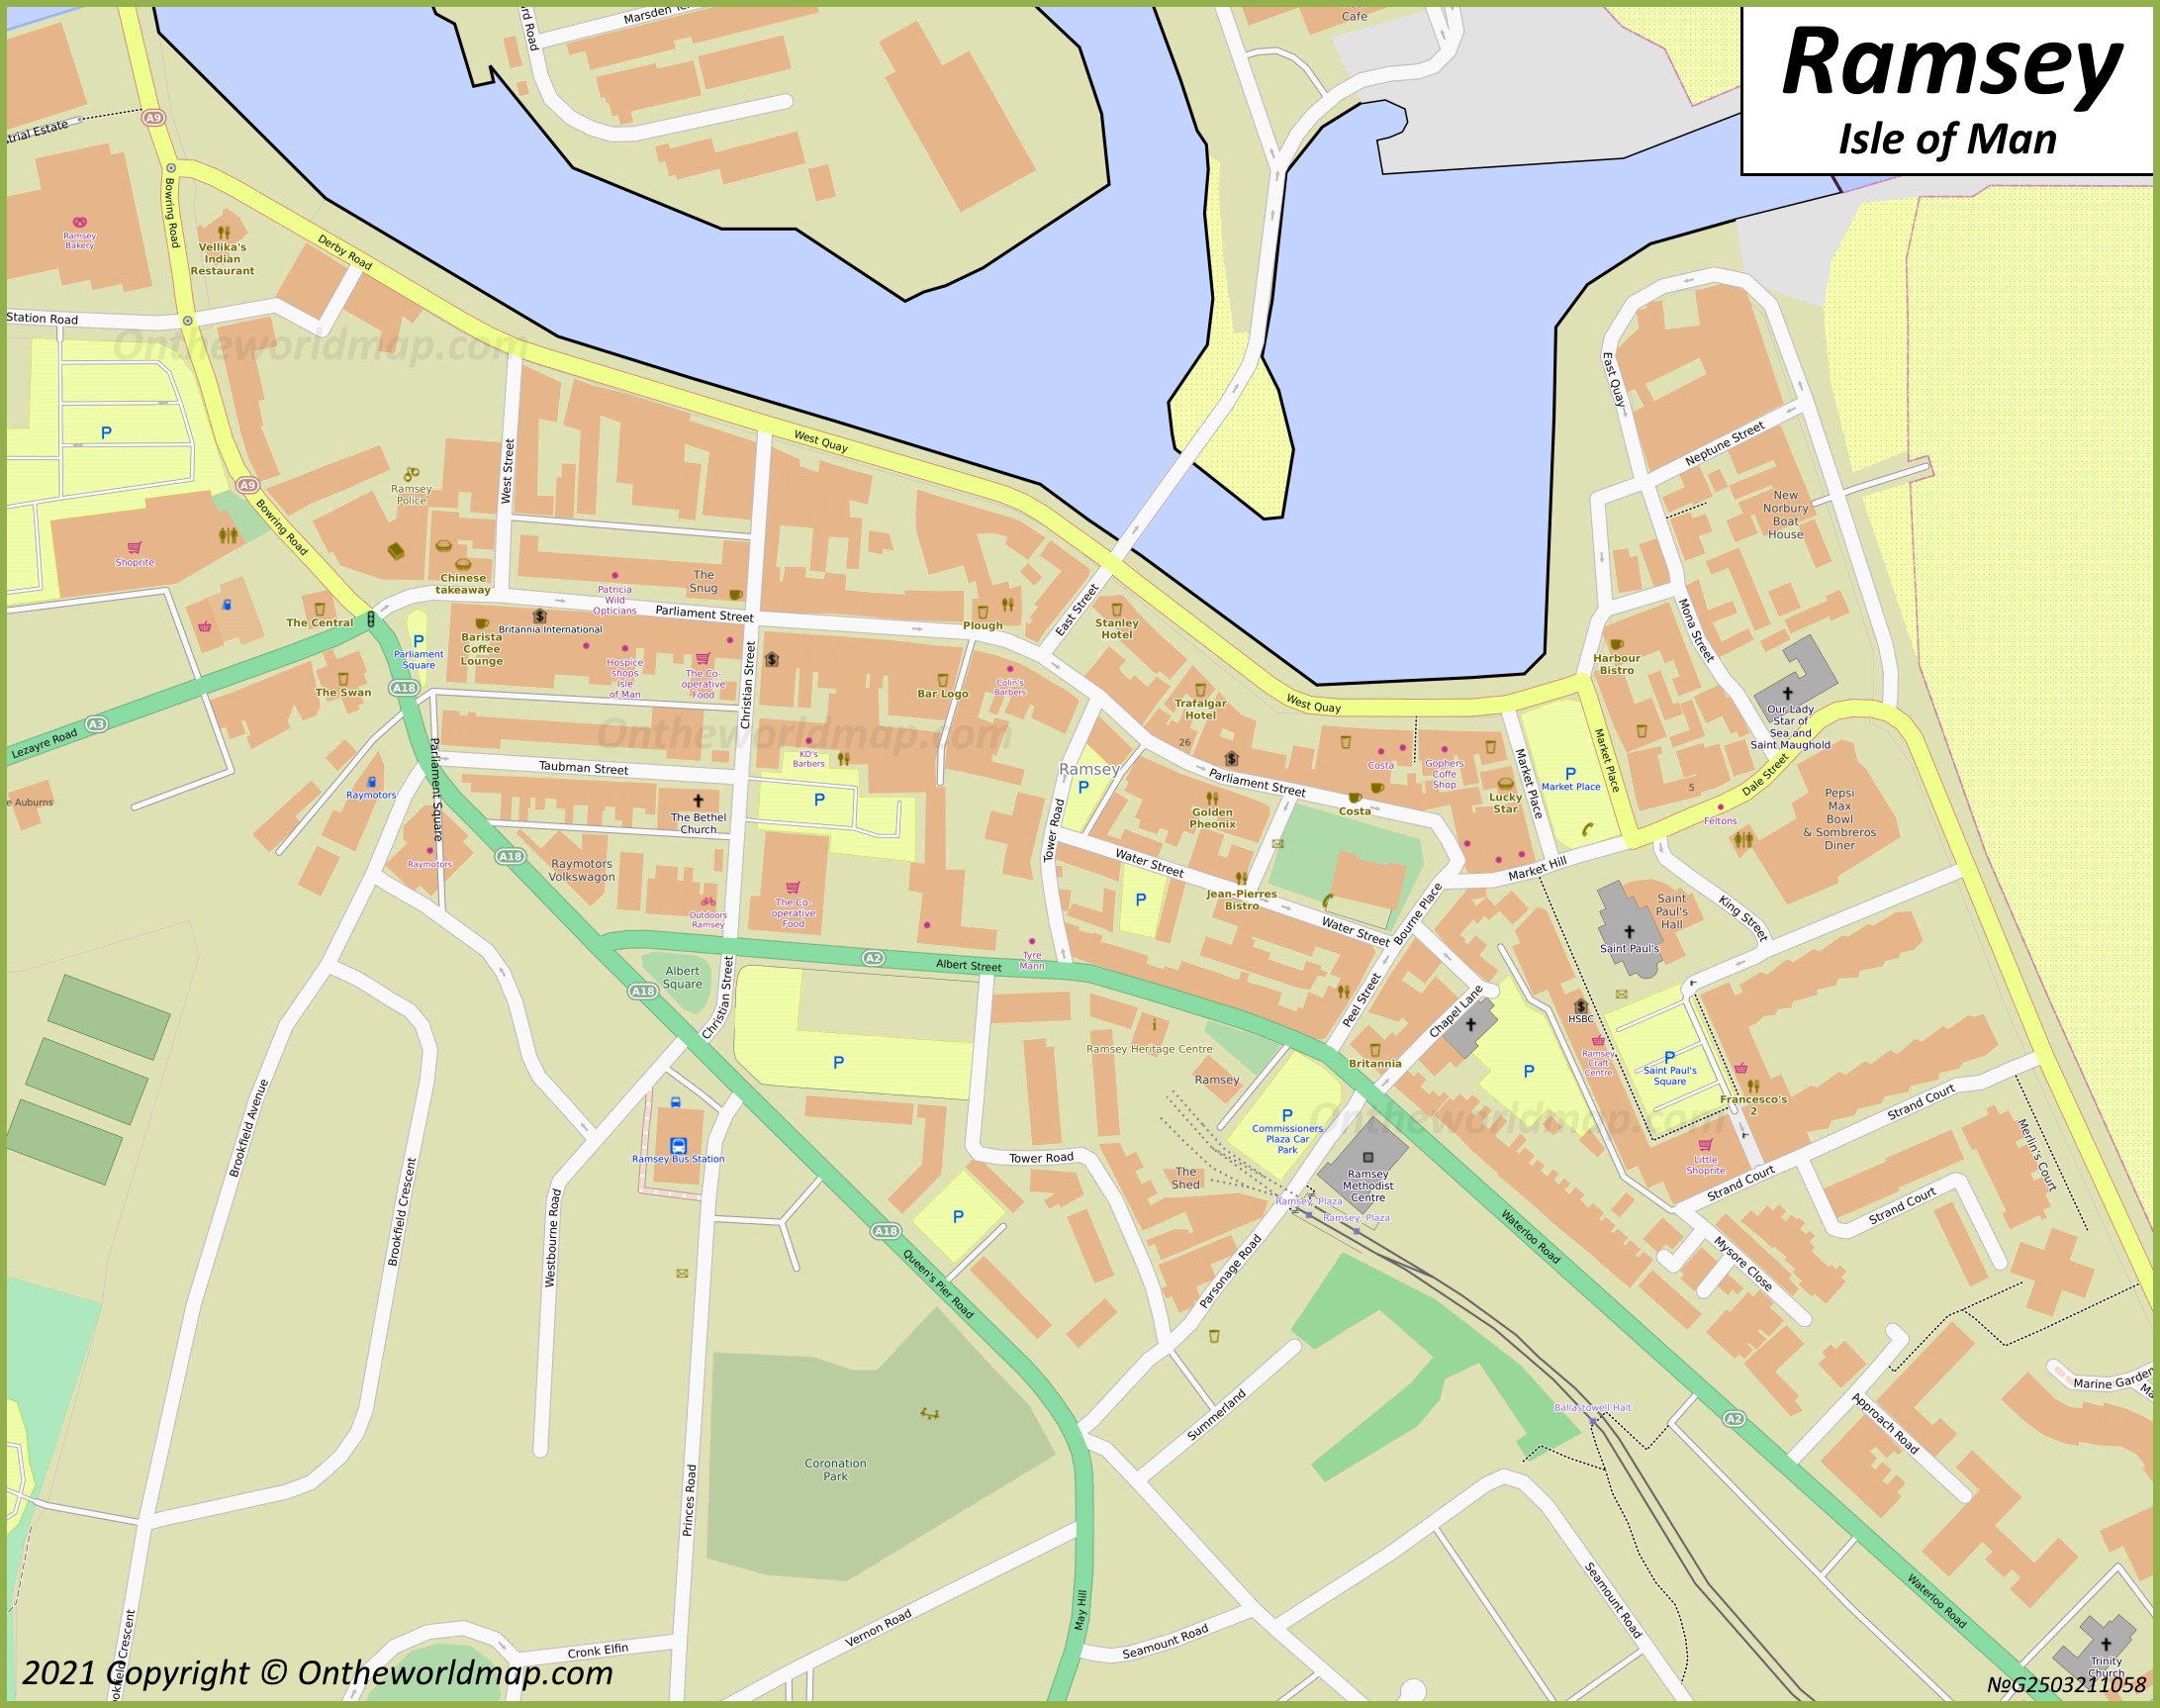 Ramsey Old Town Map